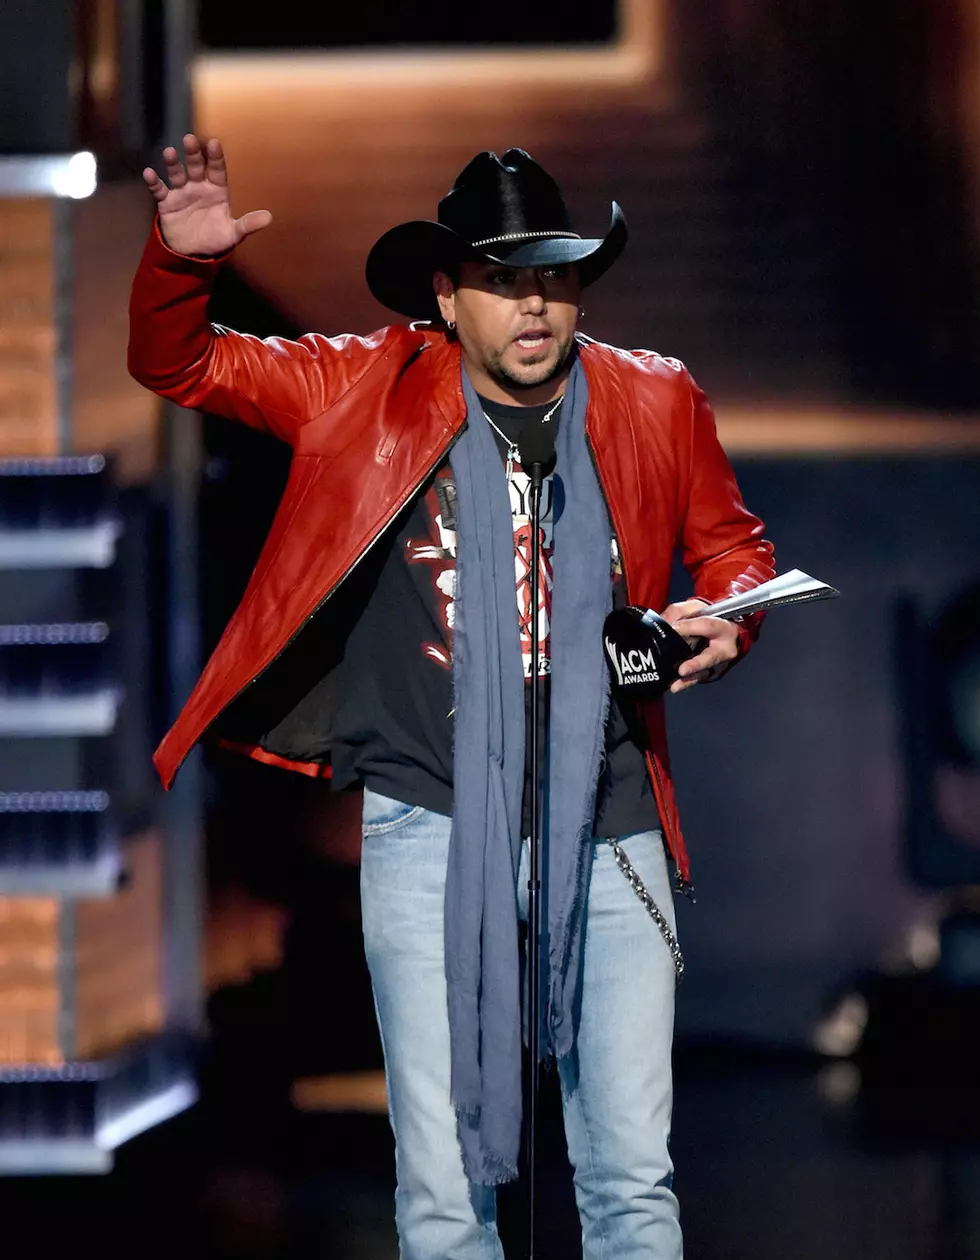 Jason Aldean Crowned Entertainer of the Year at the 2017 ACM Awards